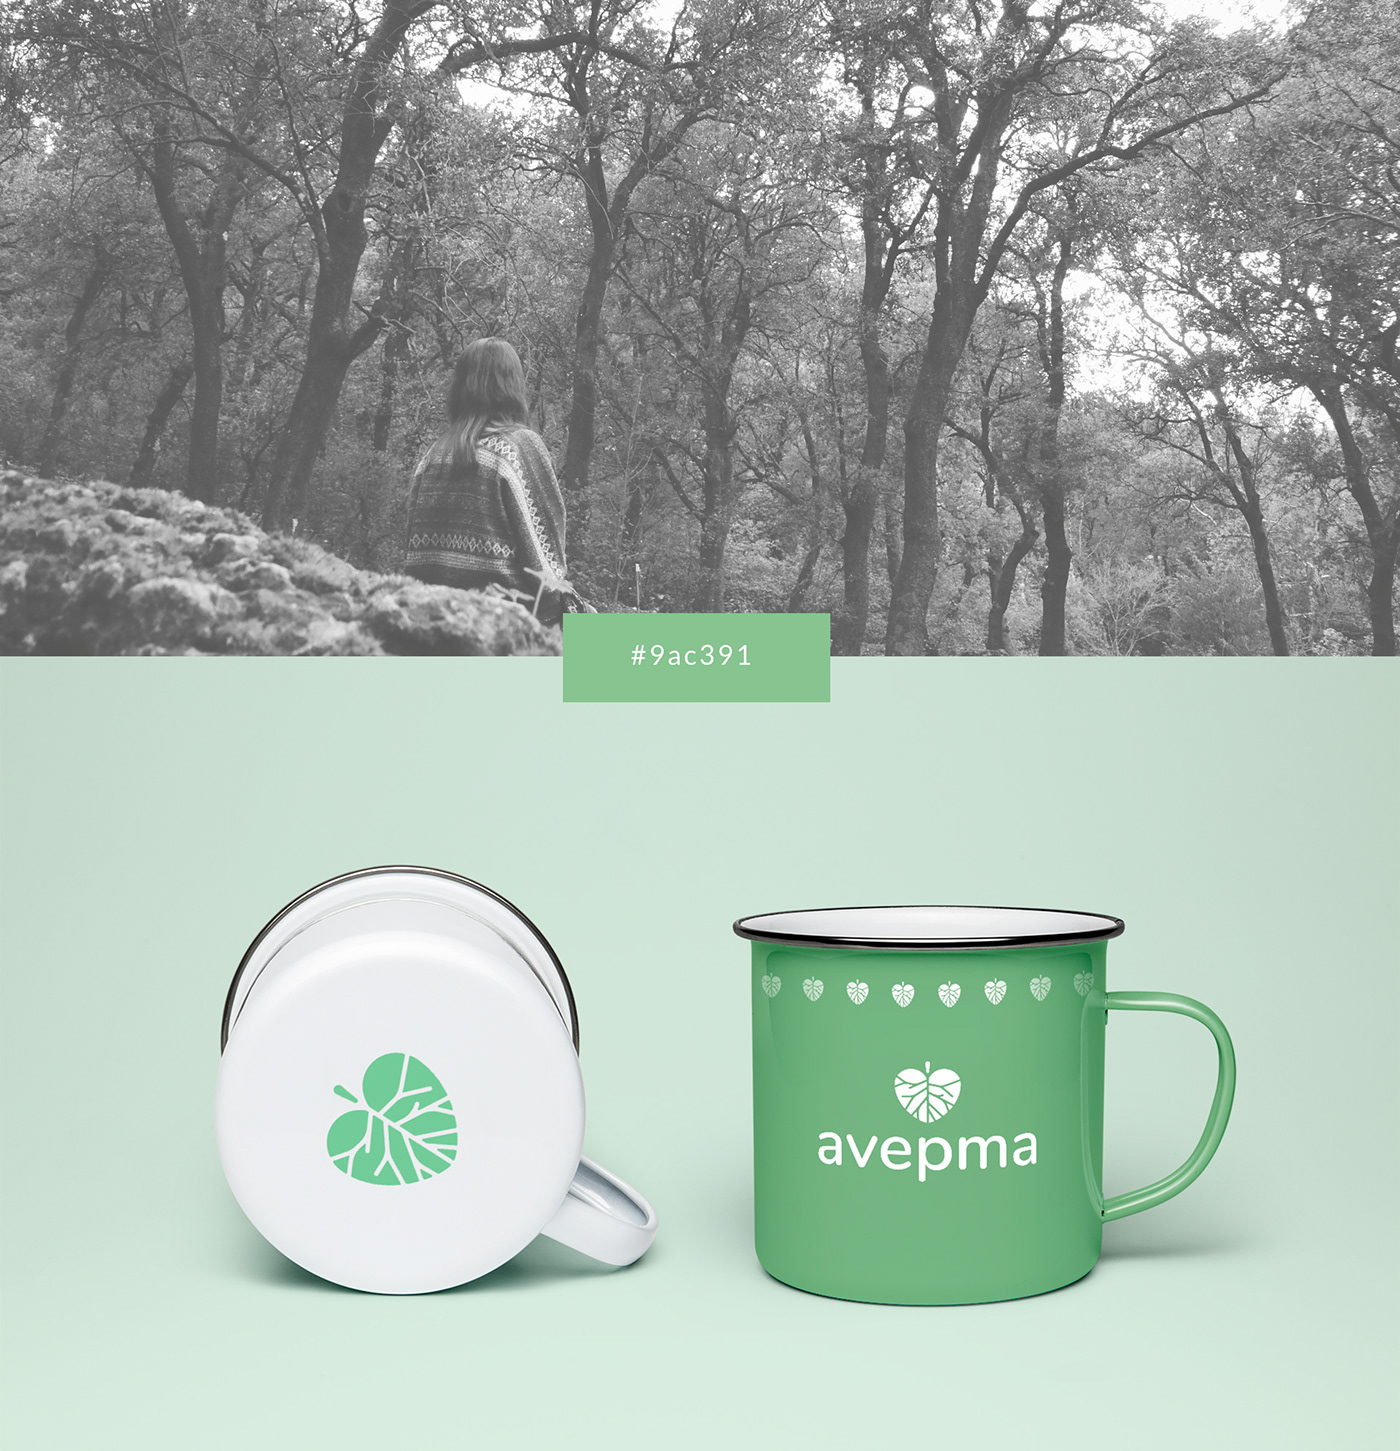 environment NGO youth Corporate Identity heart leaf green